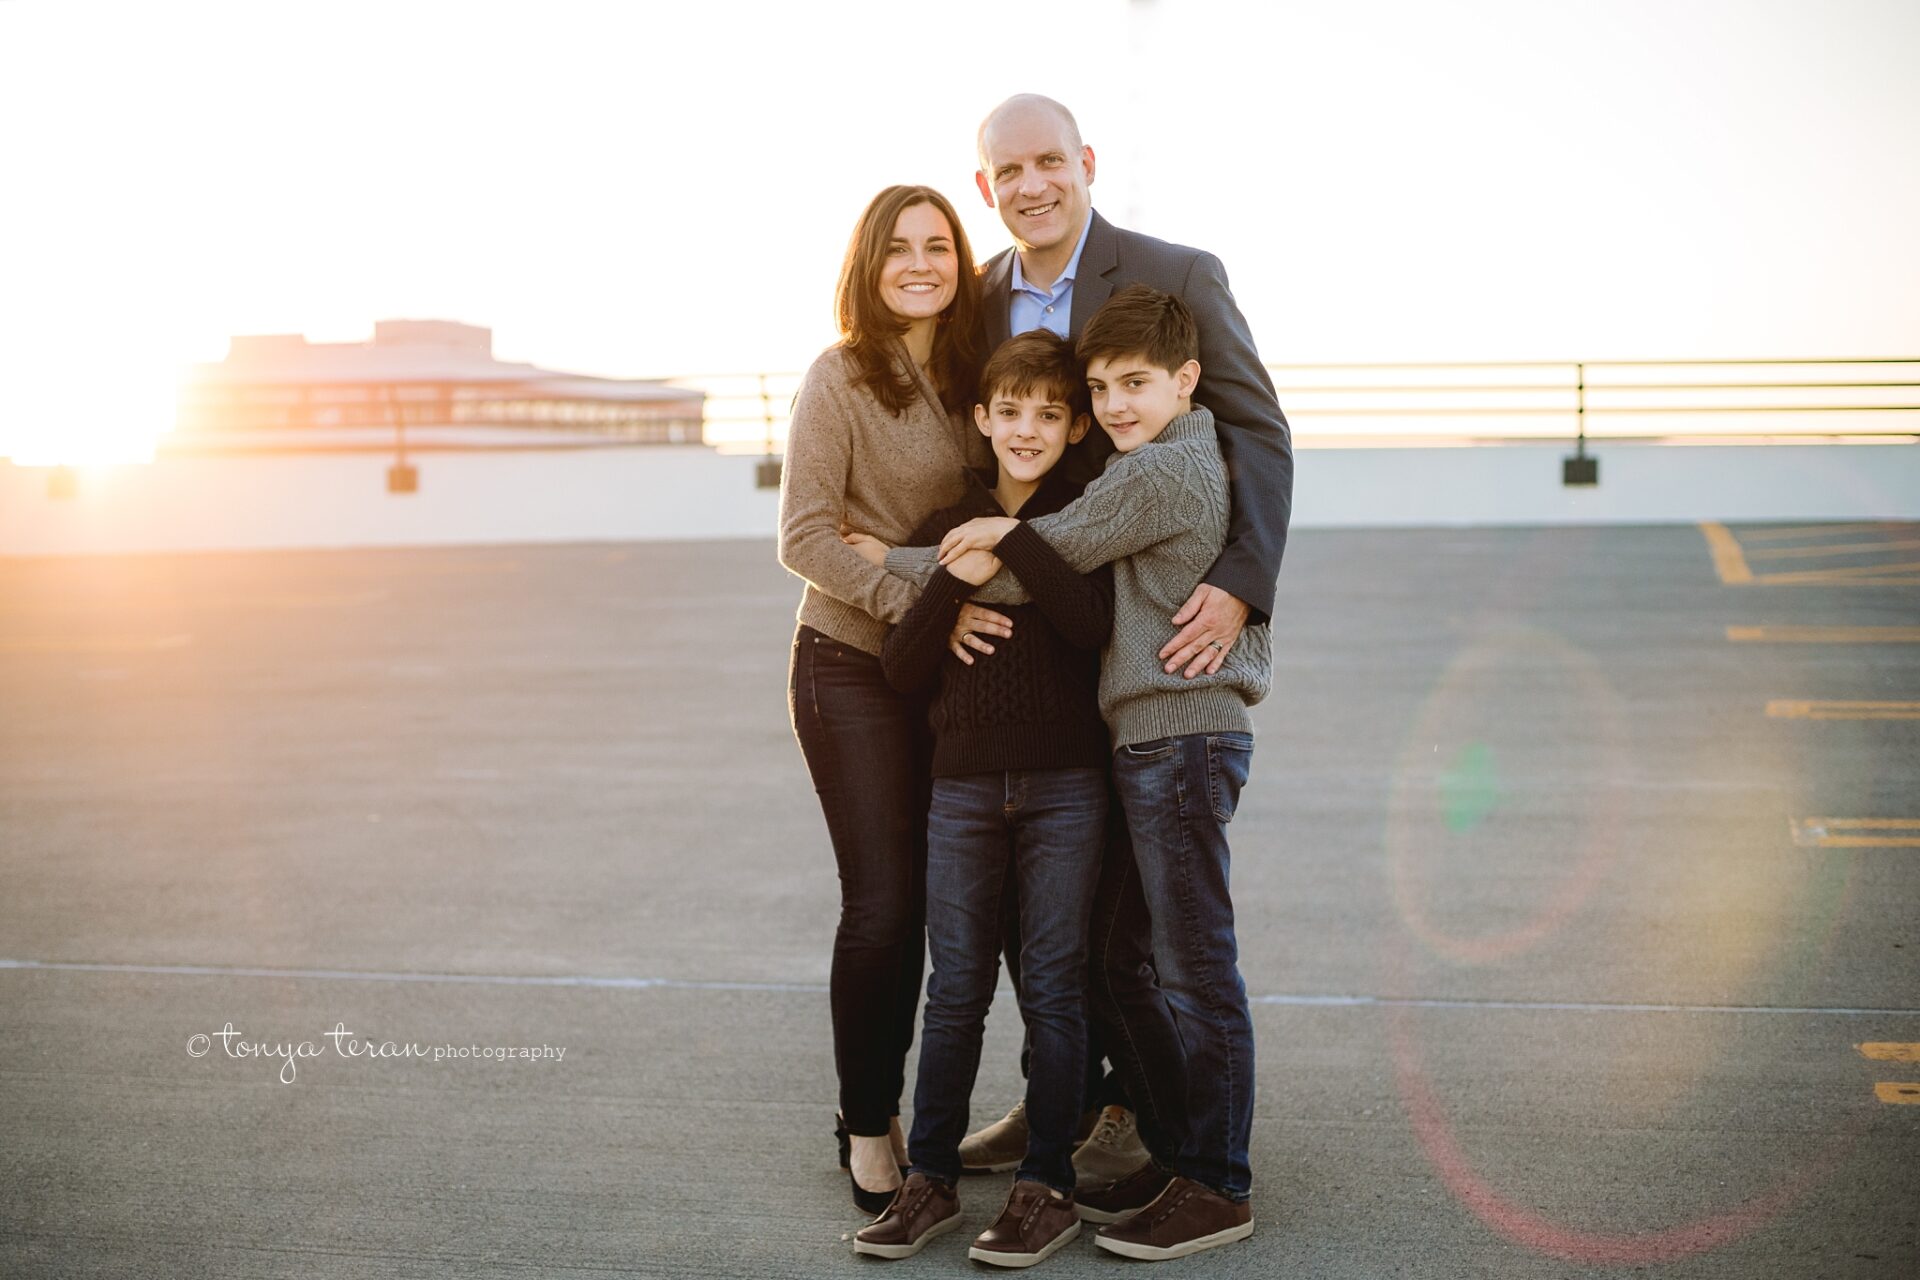 photographing-families-safely-during-covid-19-policies-dc-family-photographer